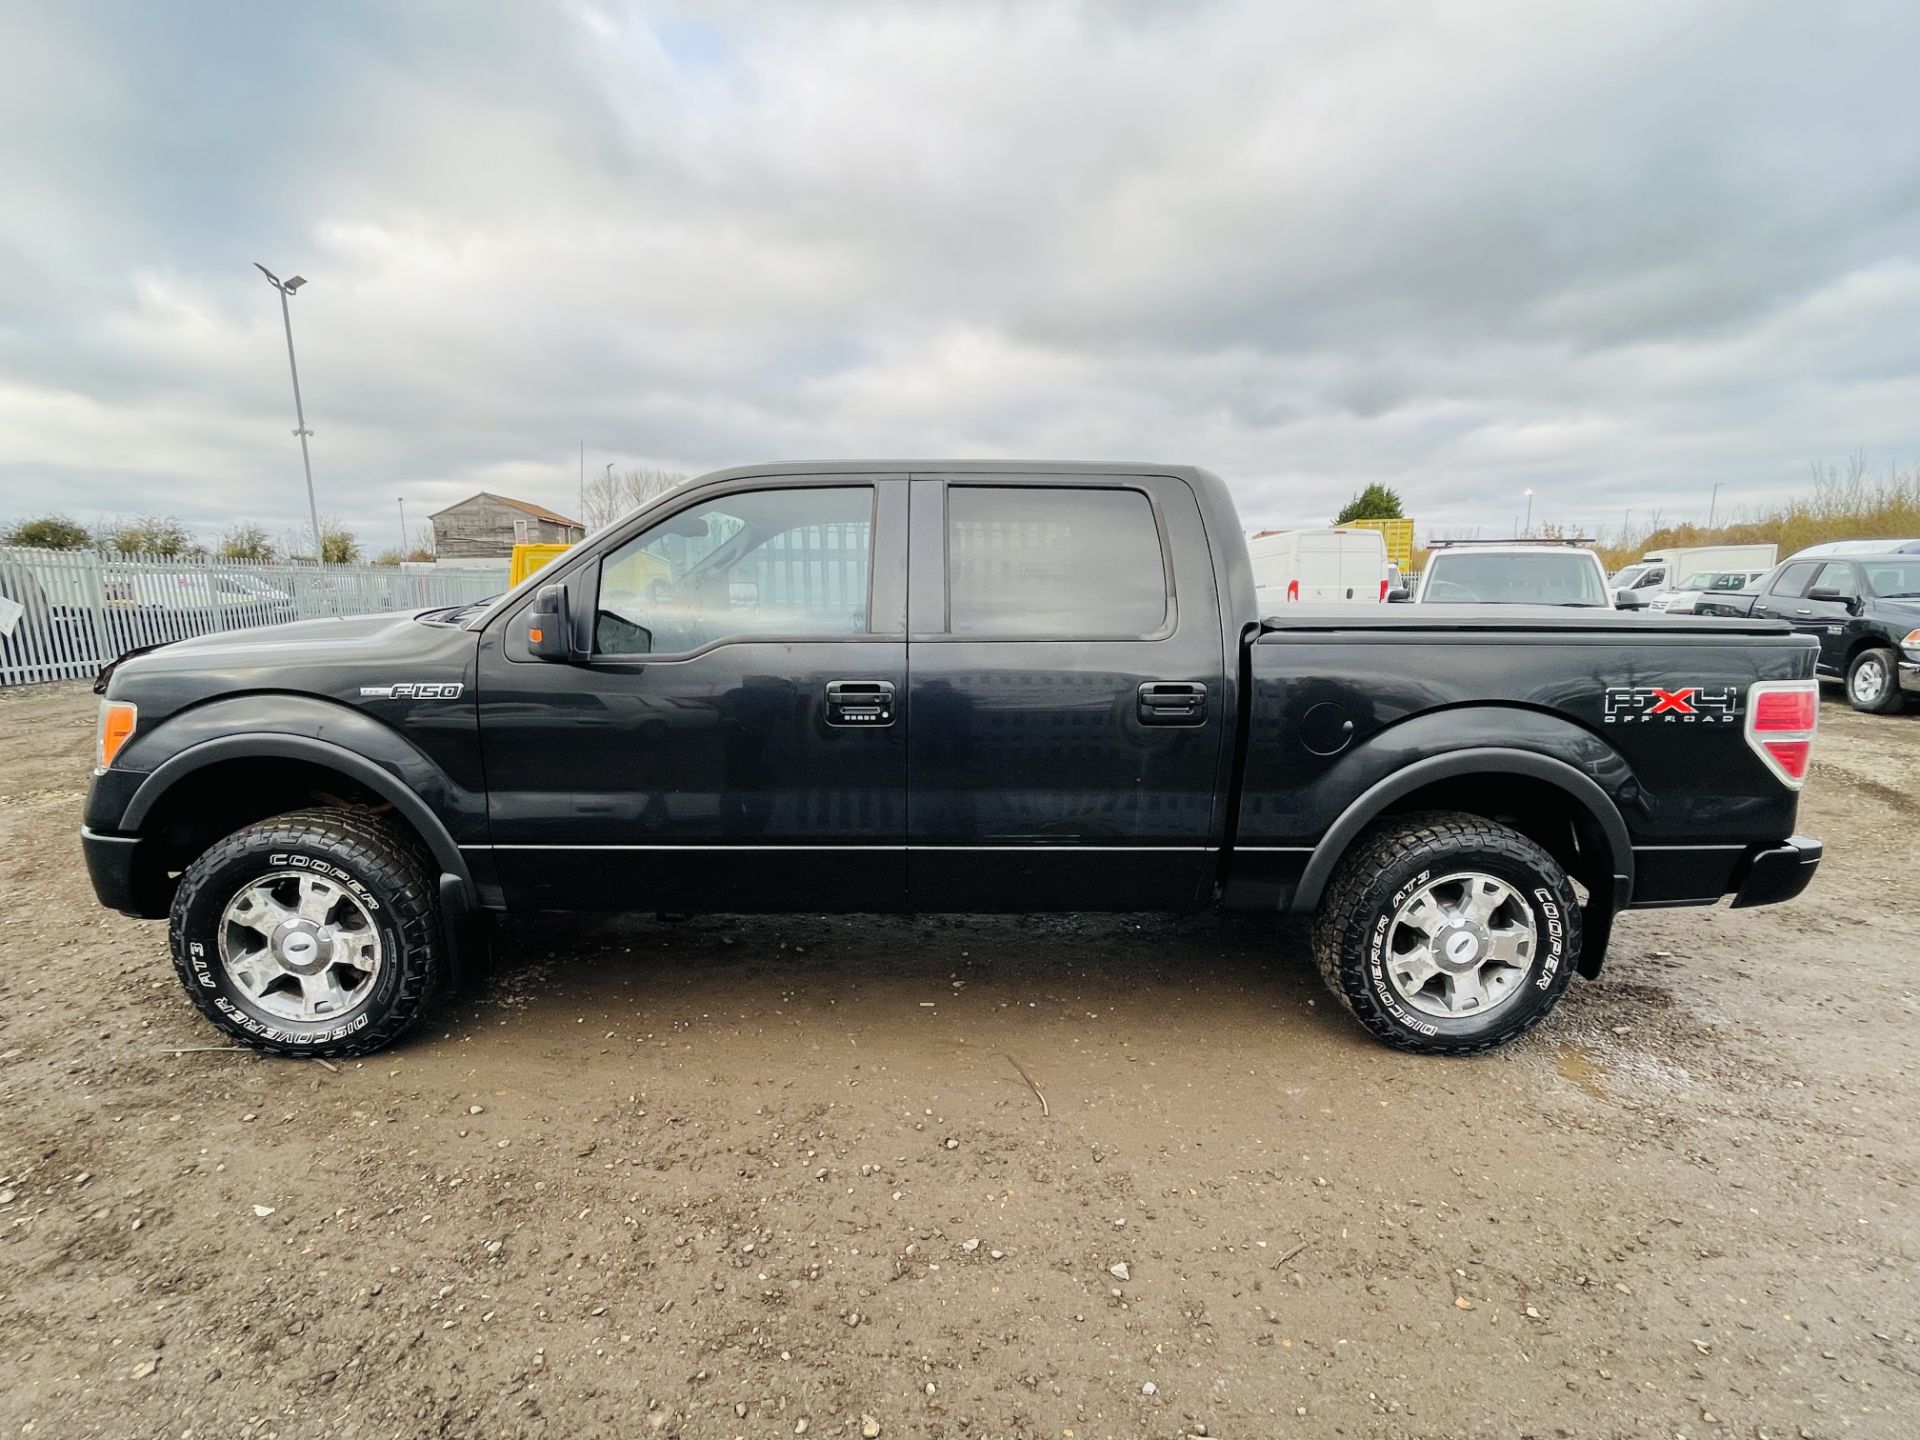 Ford F-150 3.5L V6 SuperCab 4WD FX4 Edition '2010 Year' Colour Coded Package - Top Spec - Image 5 of 24